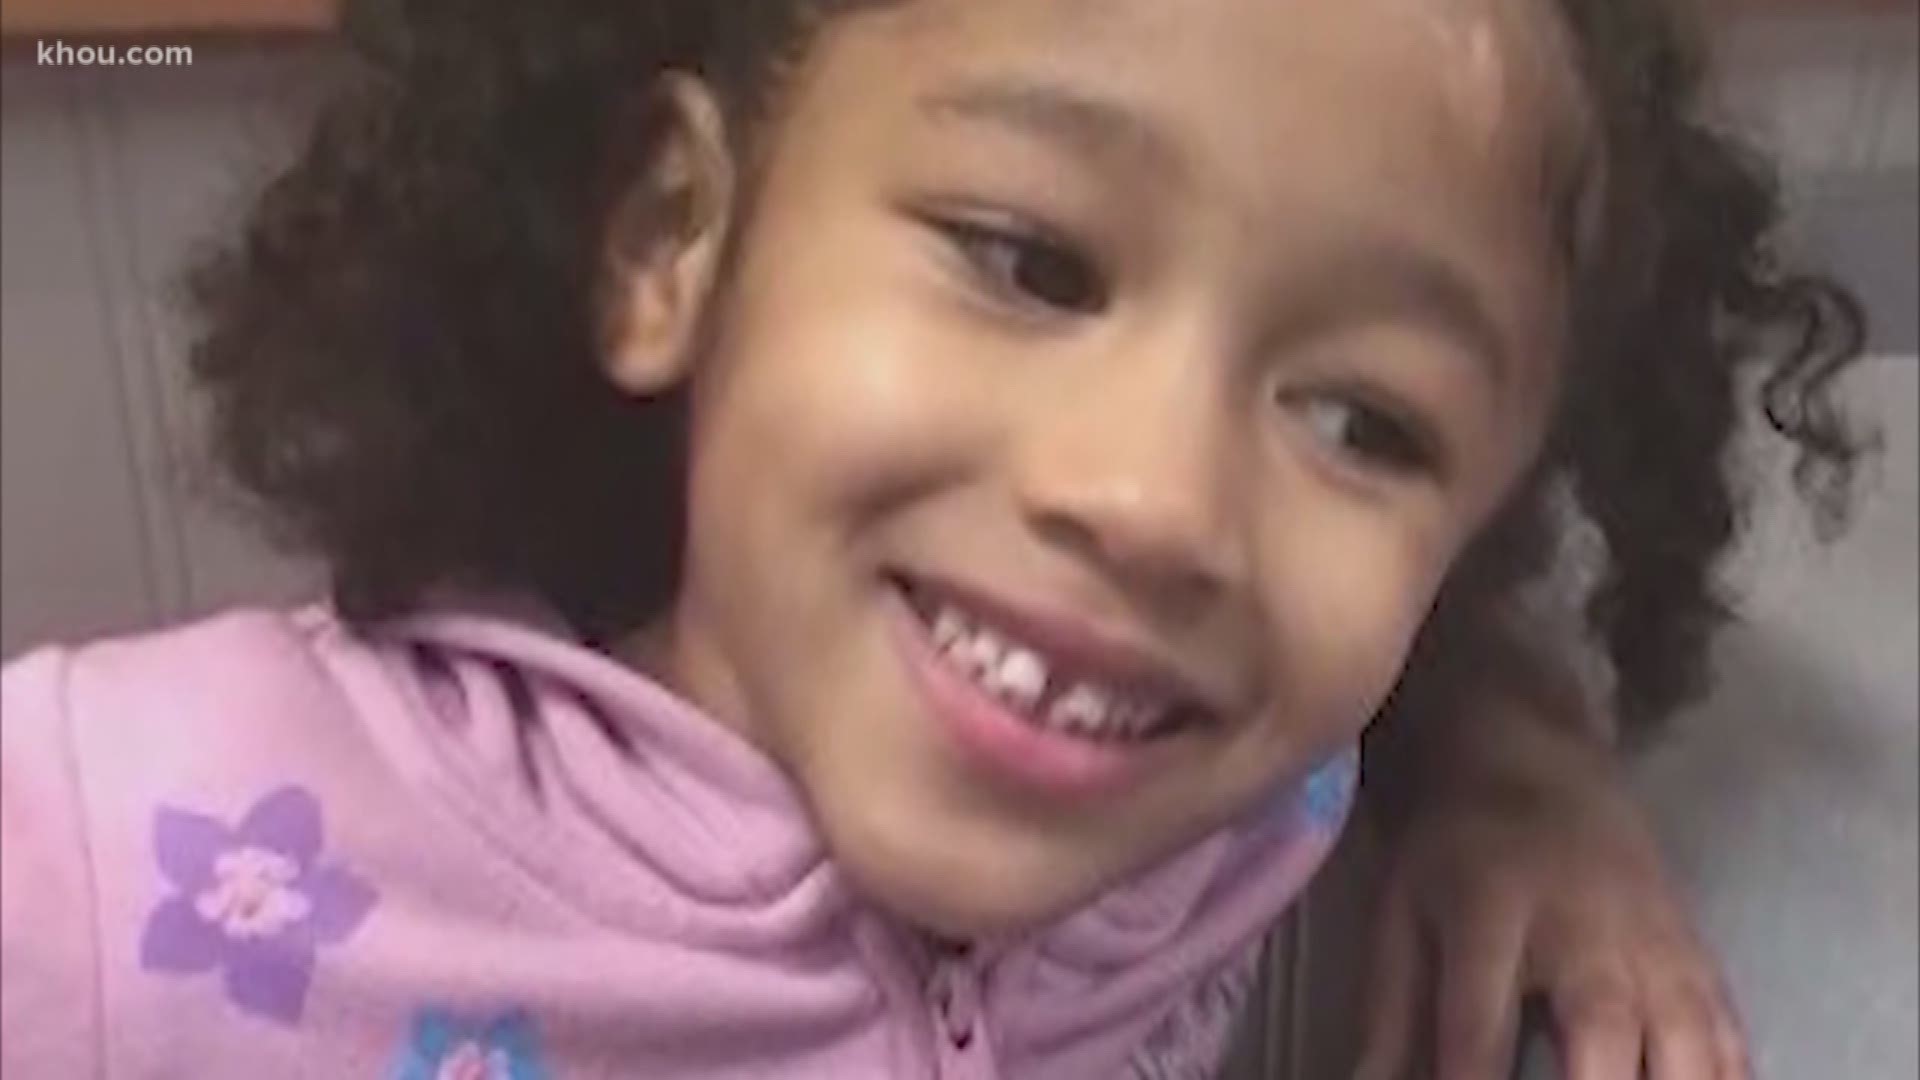 Hempstead County in Arkansas has voted to rename an overpass where Maleah Davis' body was recovered.